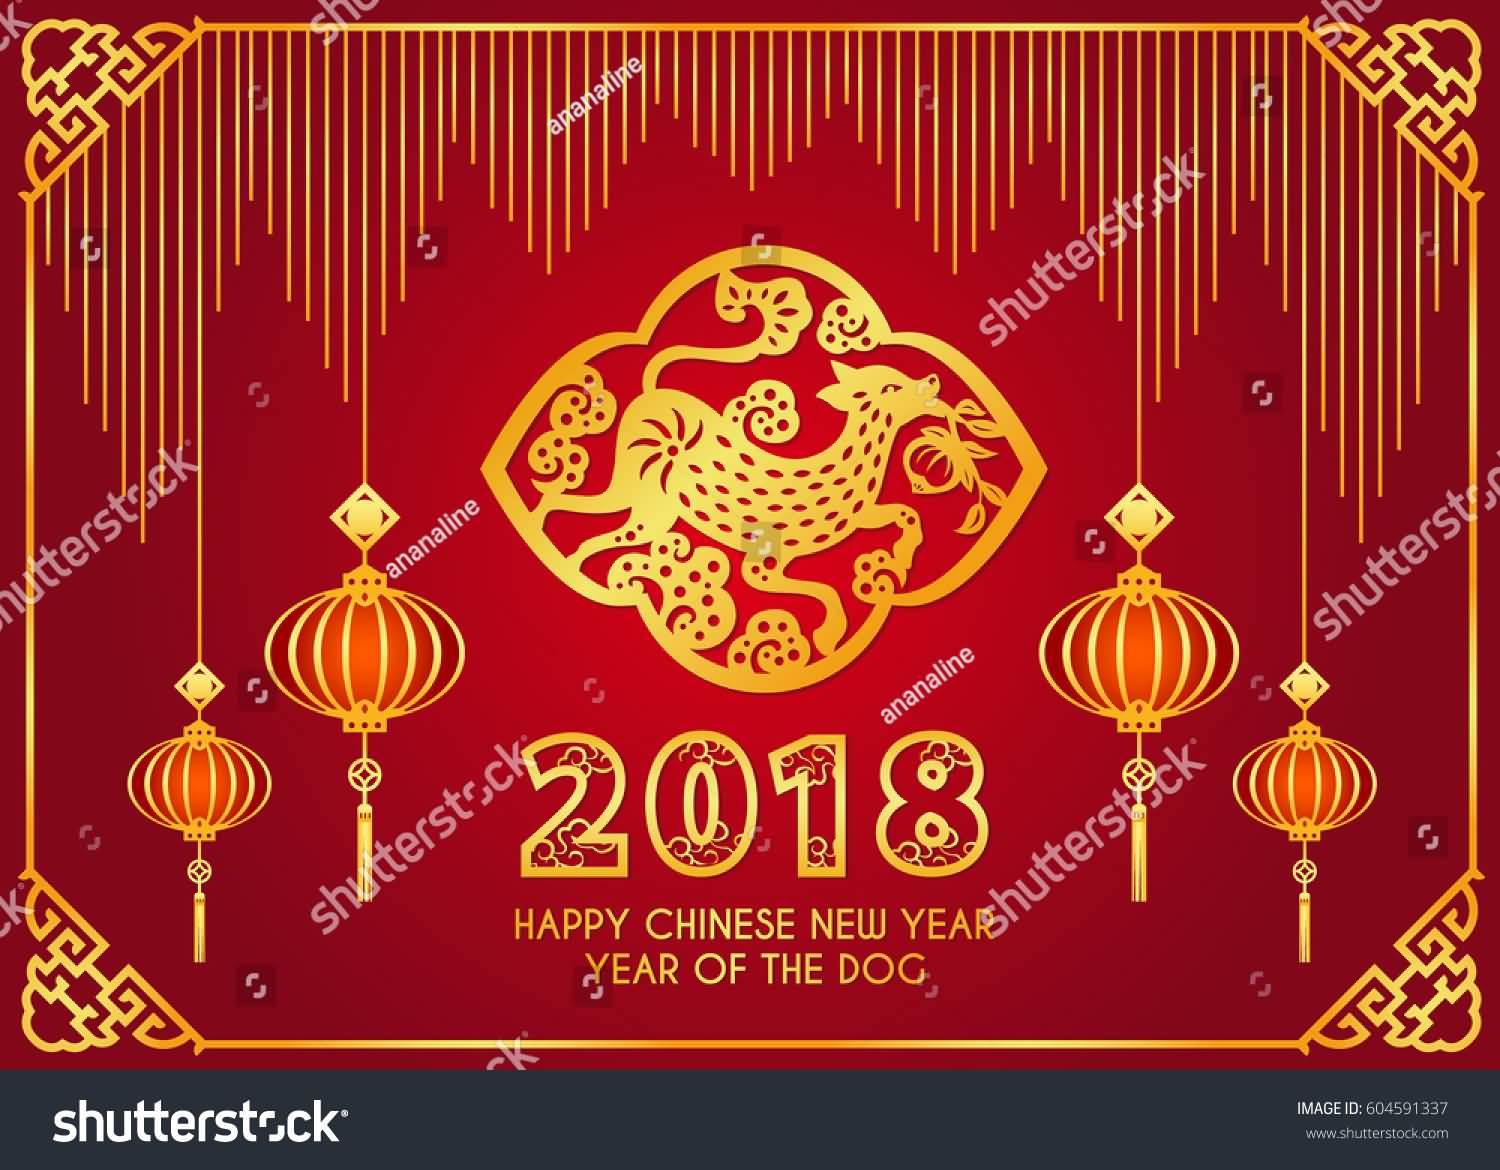 Happy Chinese New Year 2018 Cards Image Picture Photo Wallpaper 07